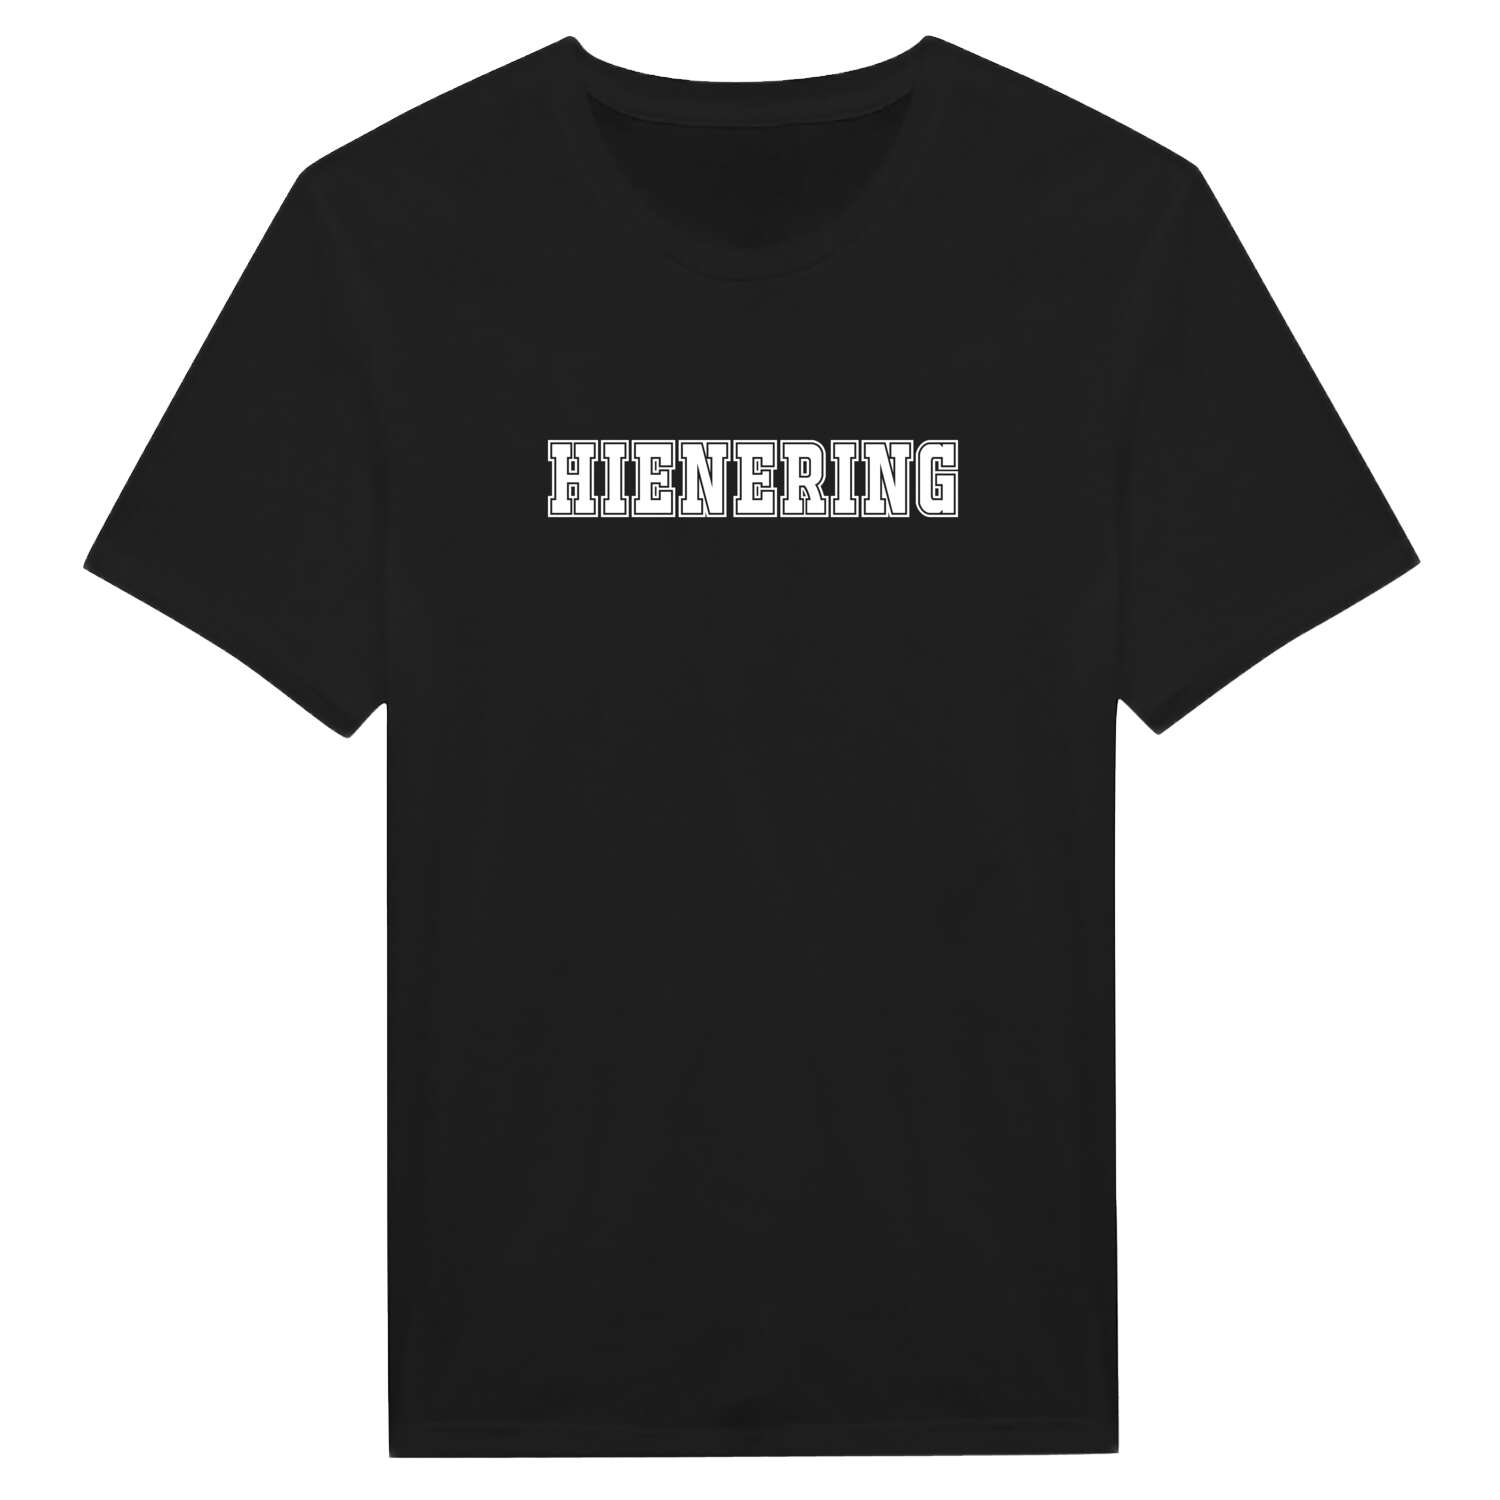 Hienering T-Shirt »Classic«